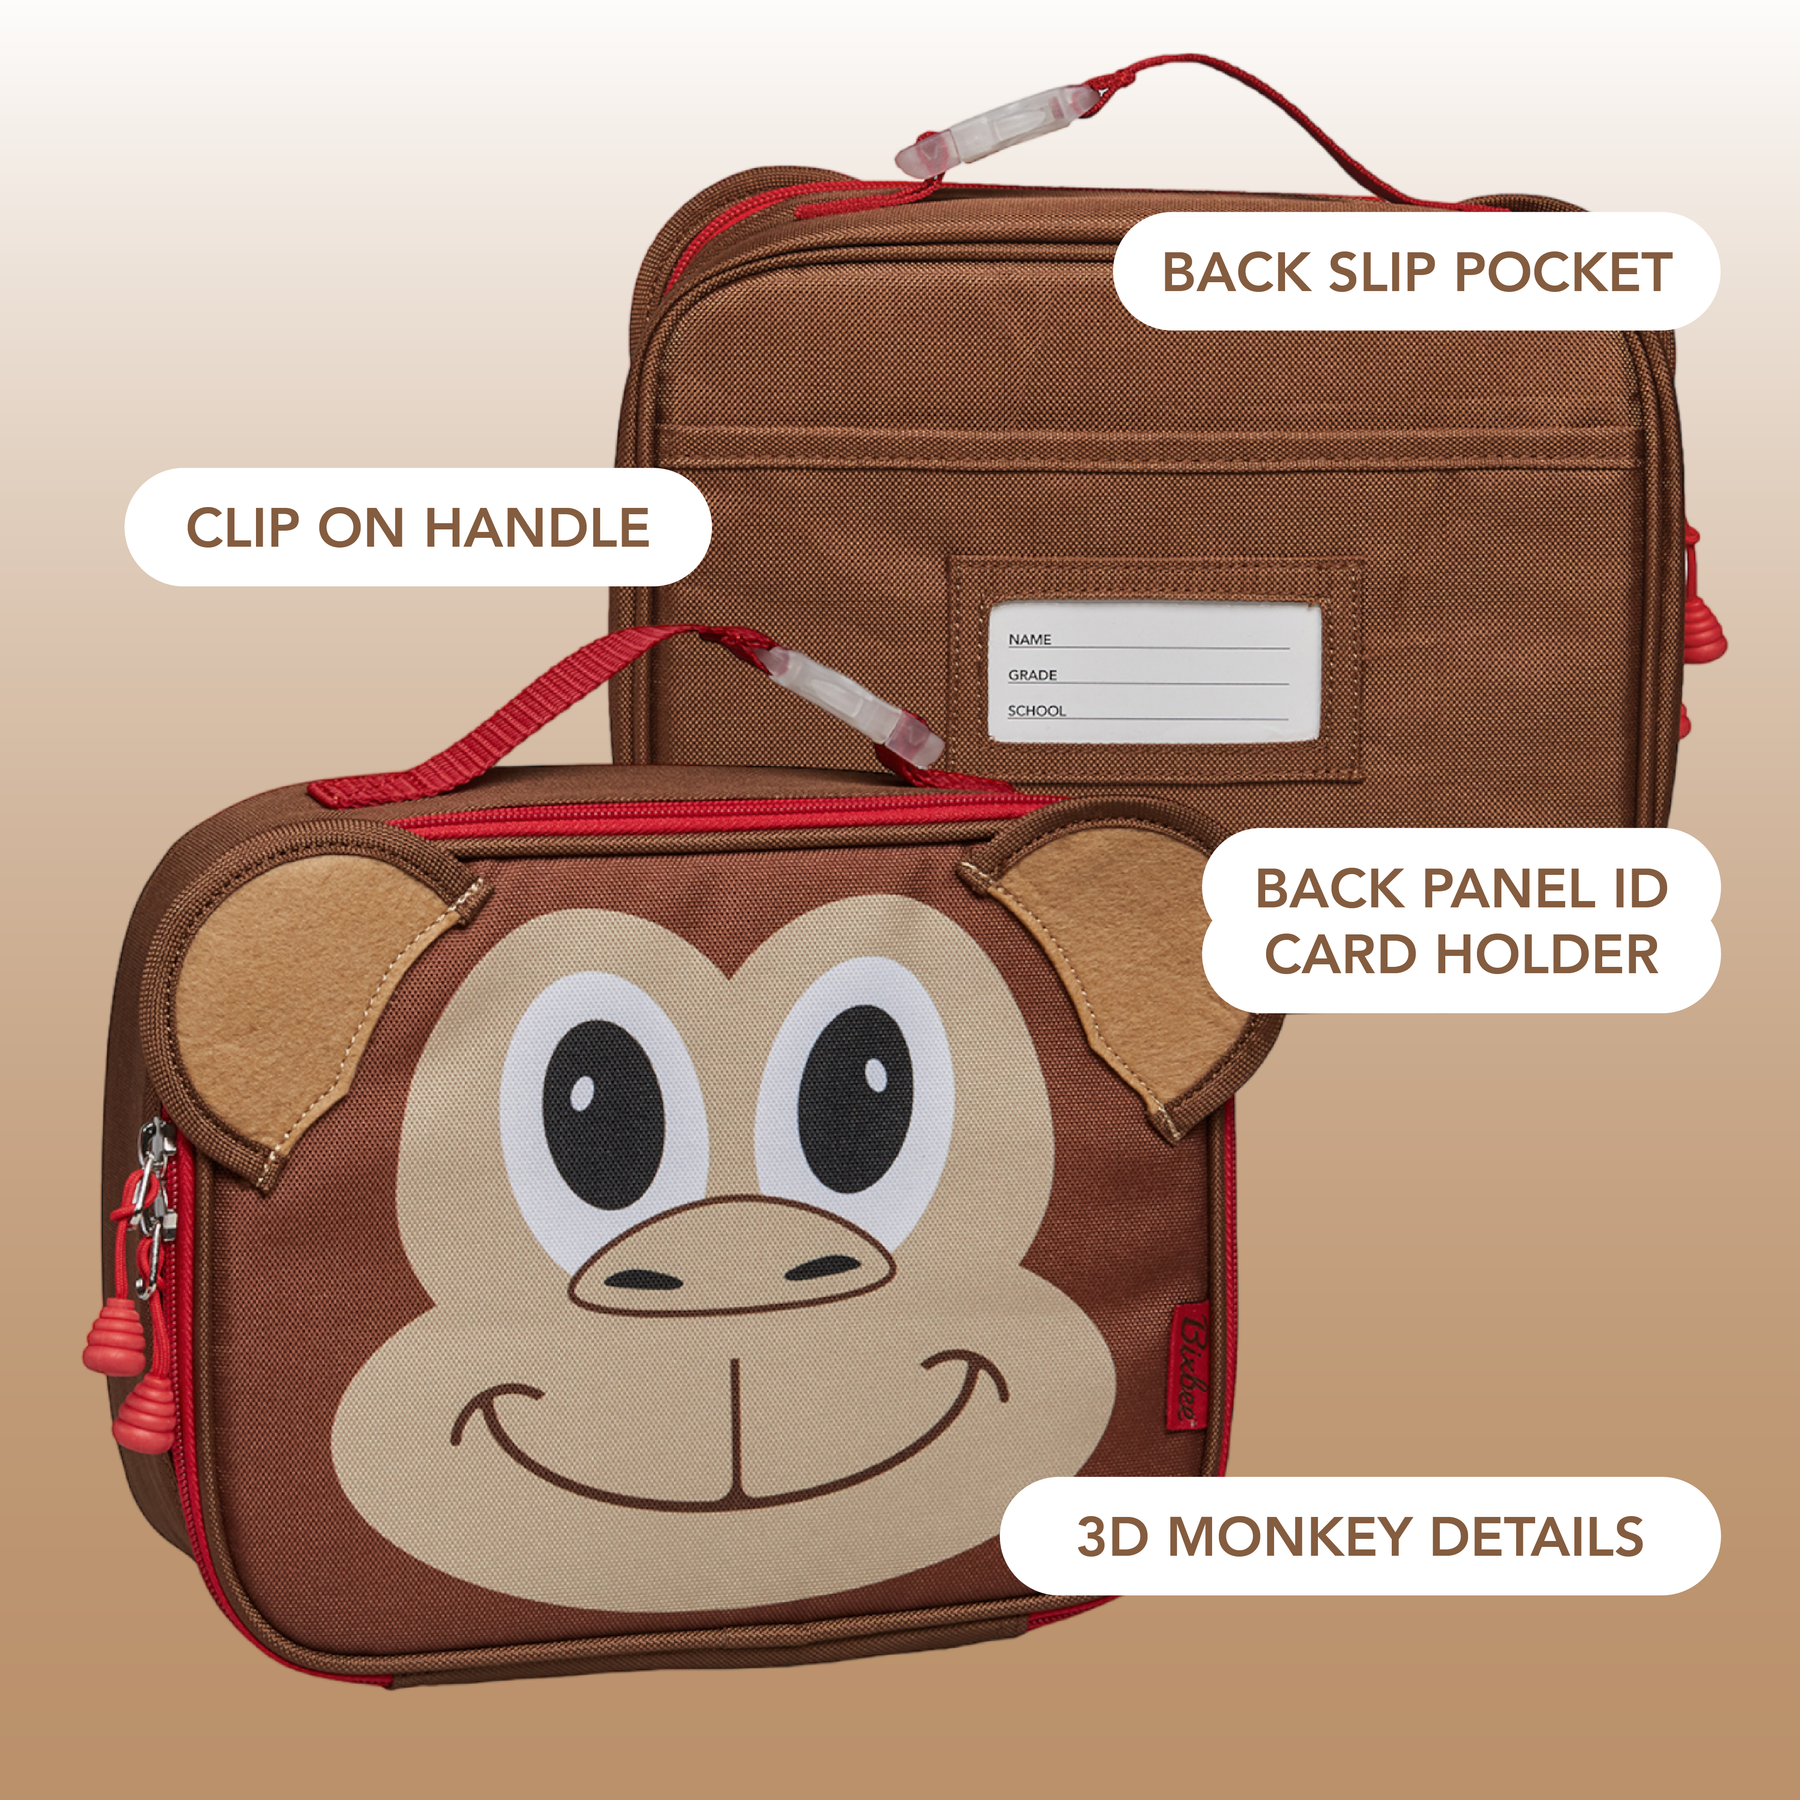 Bixbee Monkey Lunchbox - Kids Lunch Box, Insulated Lunch Bag For